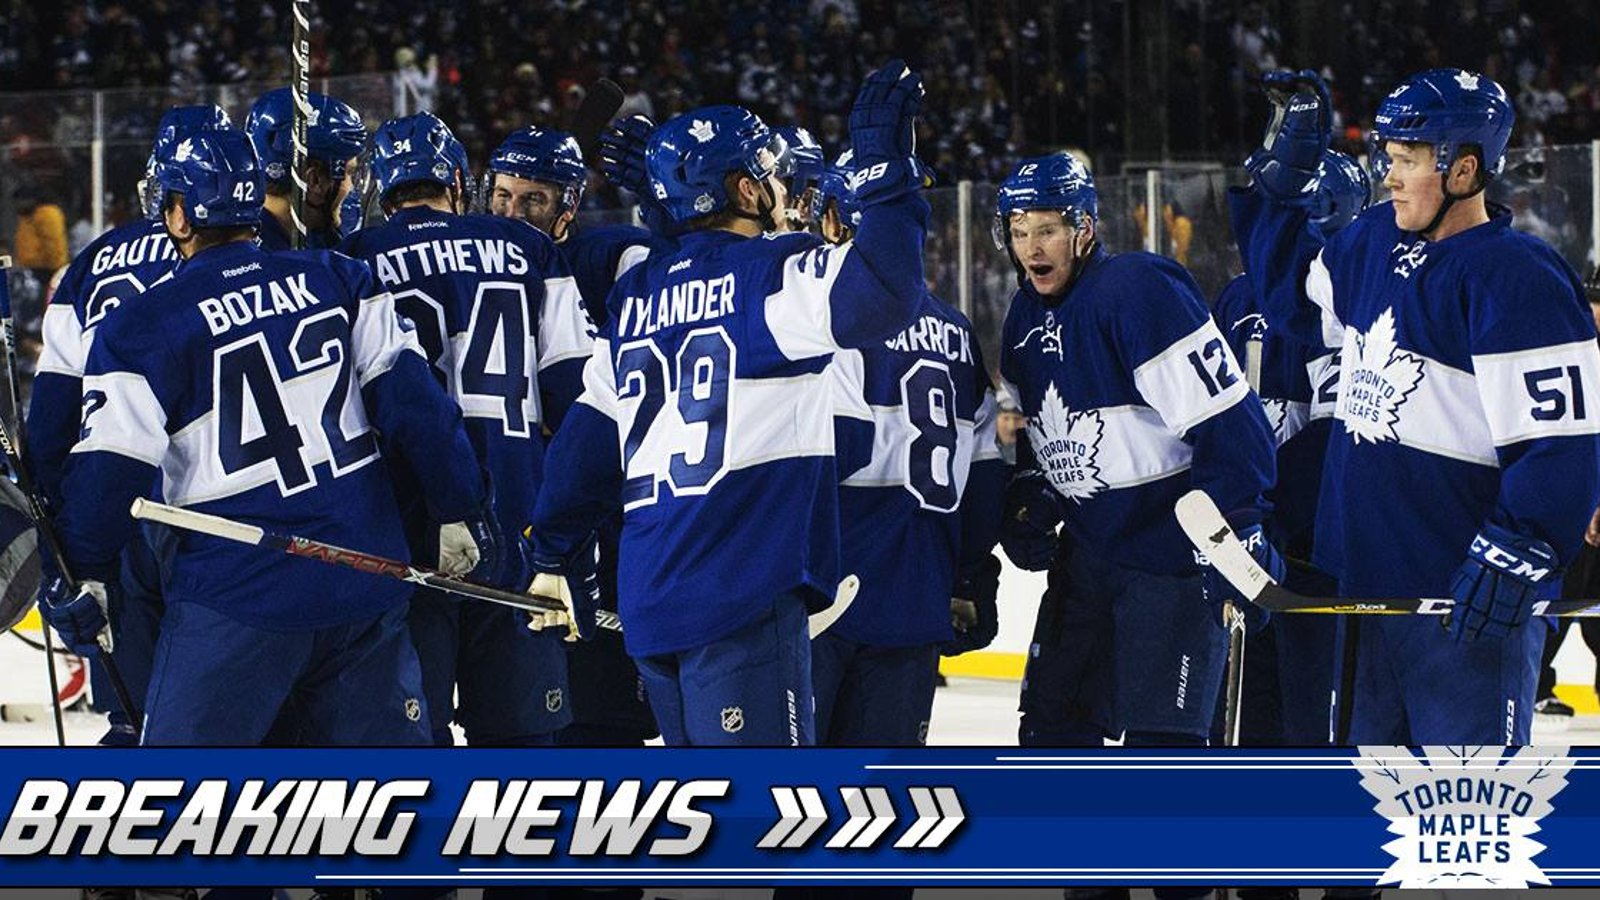 Breaking: Leafs make last minute roster change ahead of tonight's game.